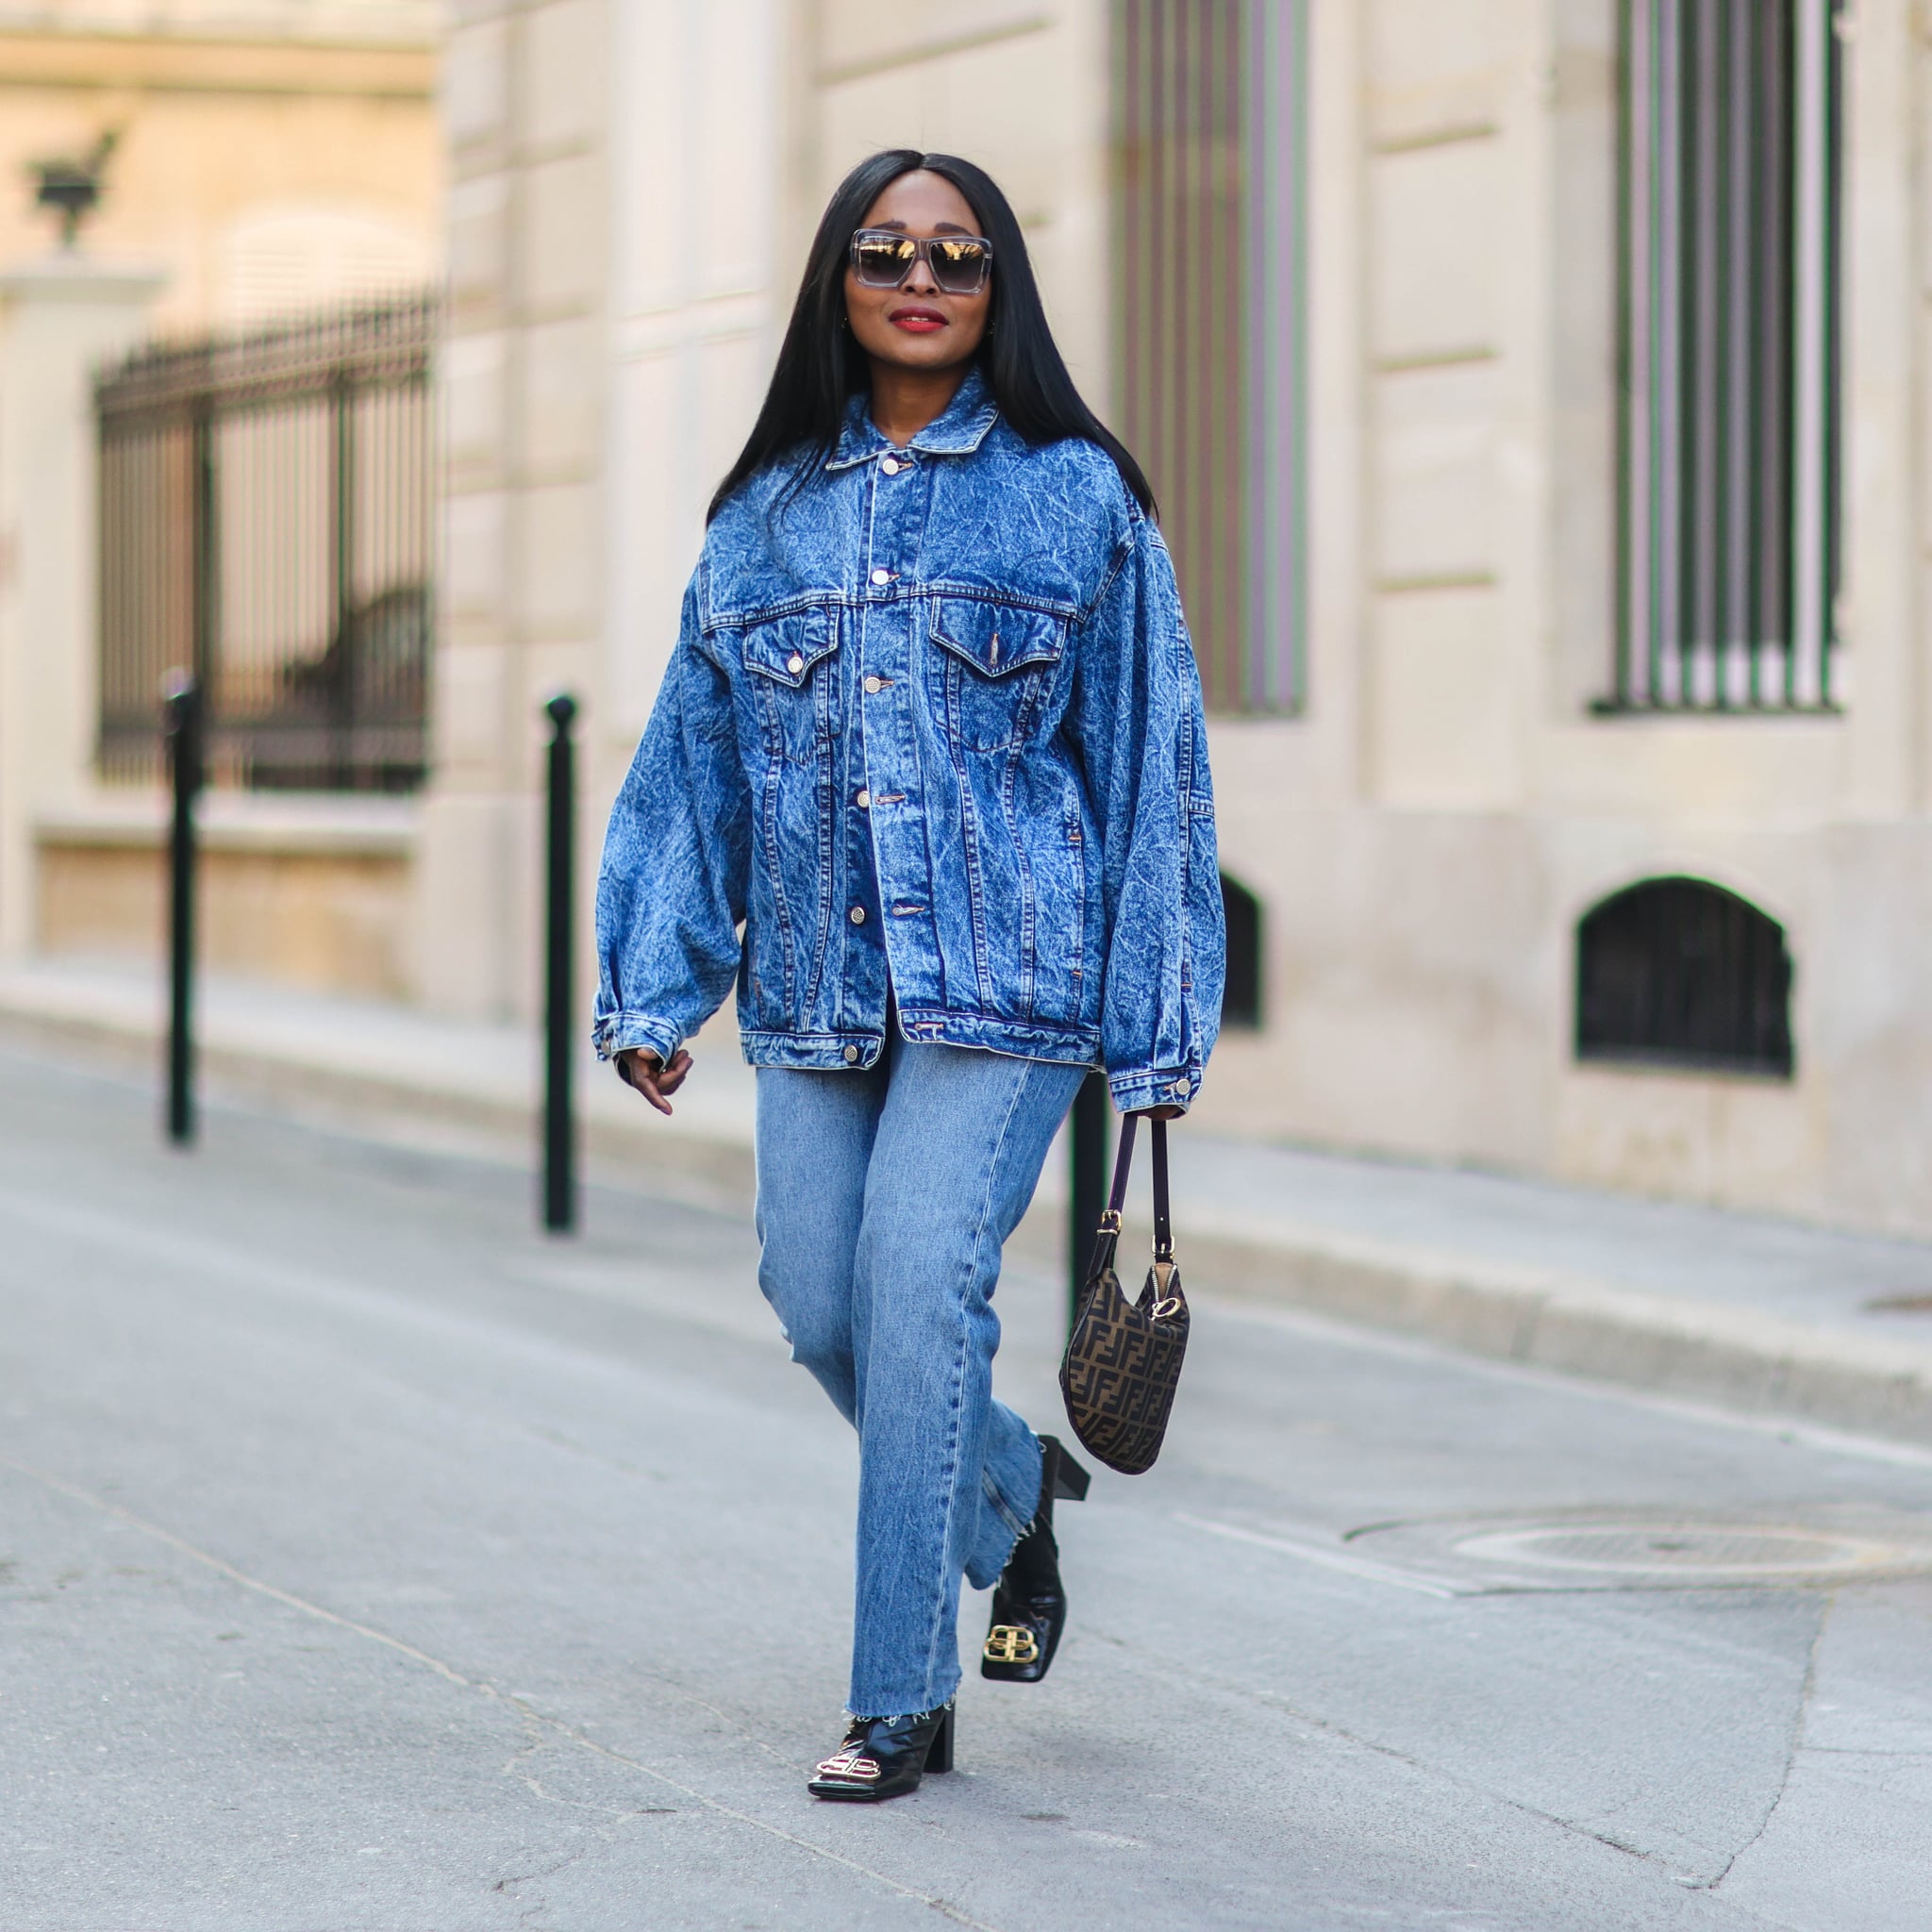 The $98 Silver Jeans Trend I Sprinted to Buy After NYFW